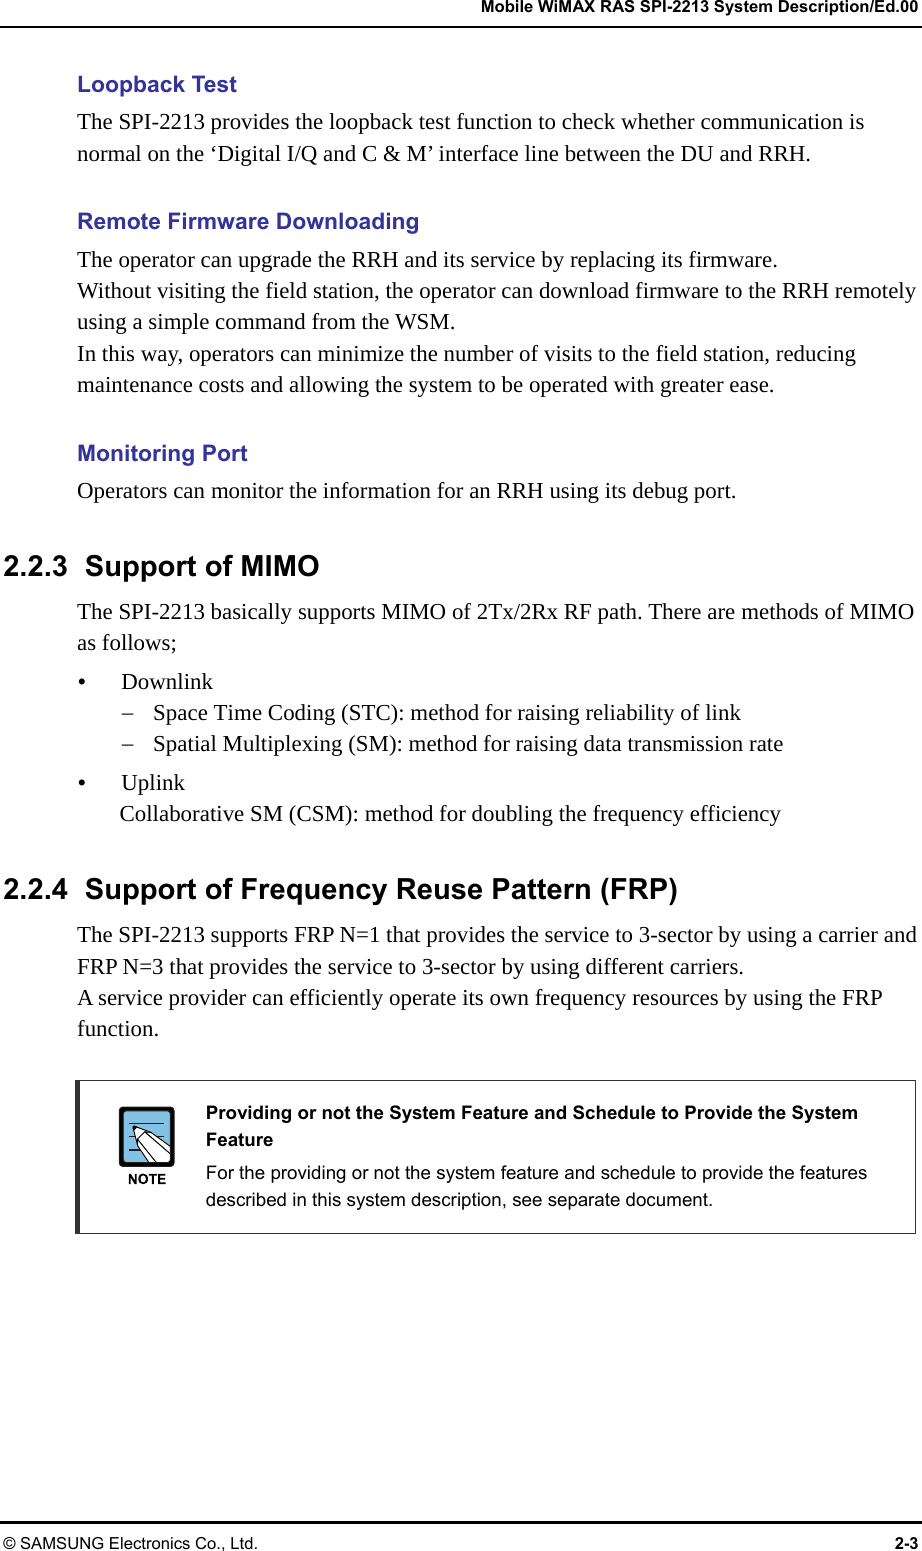   Mobile WiMAX RAS SPI-2213 System Description/Ed.00 © SAMSUNG Electronics Co., Ltd.  2-3 Loopback Test The SPI-2213 provides the loopback test function to check whether communication is normal on the ‘Digital I/Q and C &amp; M’ interface line between the DU and RRH.  Remote Firmware Downloading The operator can upgrade the RRH and its service by replacing its firmware. Without visiting the field station, the operator can download firmware to the RRH remotely using a simple command from the WSM. In this way, operators can minimize the number of visits to the field station, reducing maintenance costs and allowing the system to be operated with greater ease.  Monitoring Port Operators can monitor the information for an RRH using its debug port.  2.2.3  Support of MIMO The SPI-2213 basically supports MIMO of 2Tx/2Rx RF path. There are methods of MIMO as follows; y Downlink − Space Time Coding (STC): method for raising reliability of link − Spatial Multiplexing (SM): method for raising data transmission rate y Uplink Collaborative SM (CSM): method for doubling the frequency efficiency  2.2.4  Support of Frequency Reuse Pattern (FRP) The SPI-2213 supports FRP N=1 that provides the service to 3-sector by using a carrier and FRP N=3 that provides the service to 3-sector by using different carriers. A service provider can efficiently operate its own frequency resources by using the FRP function.   Providing or not the System Feature and Schedule to Provide the System Feature   For the providing or not the system feature and schedule to provide the features described in this system description, see separate document. 